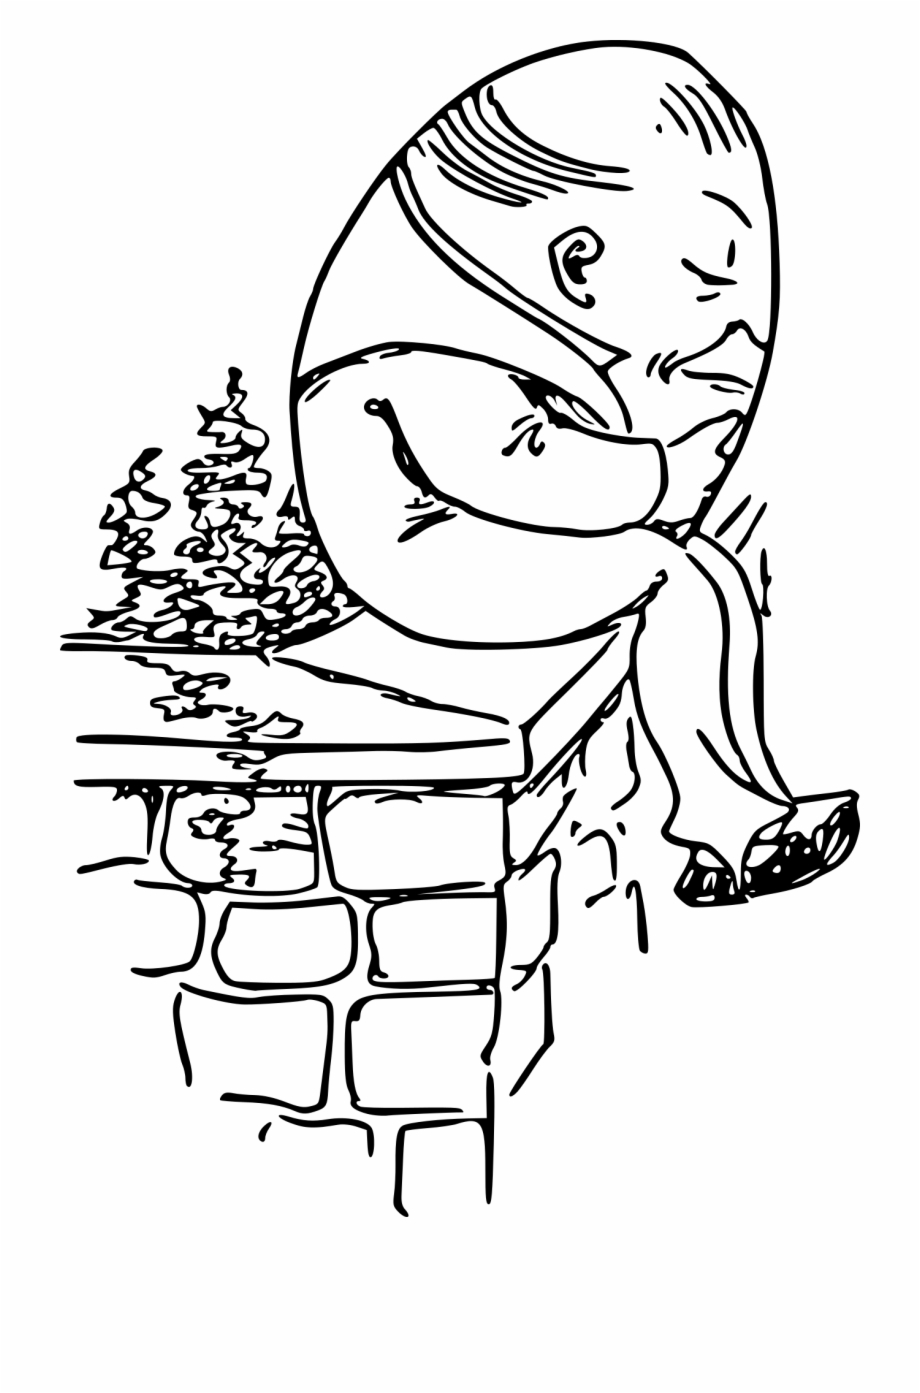 Humpty Dumpty High-Res Vector Graphic - Getty Images